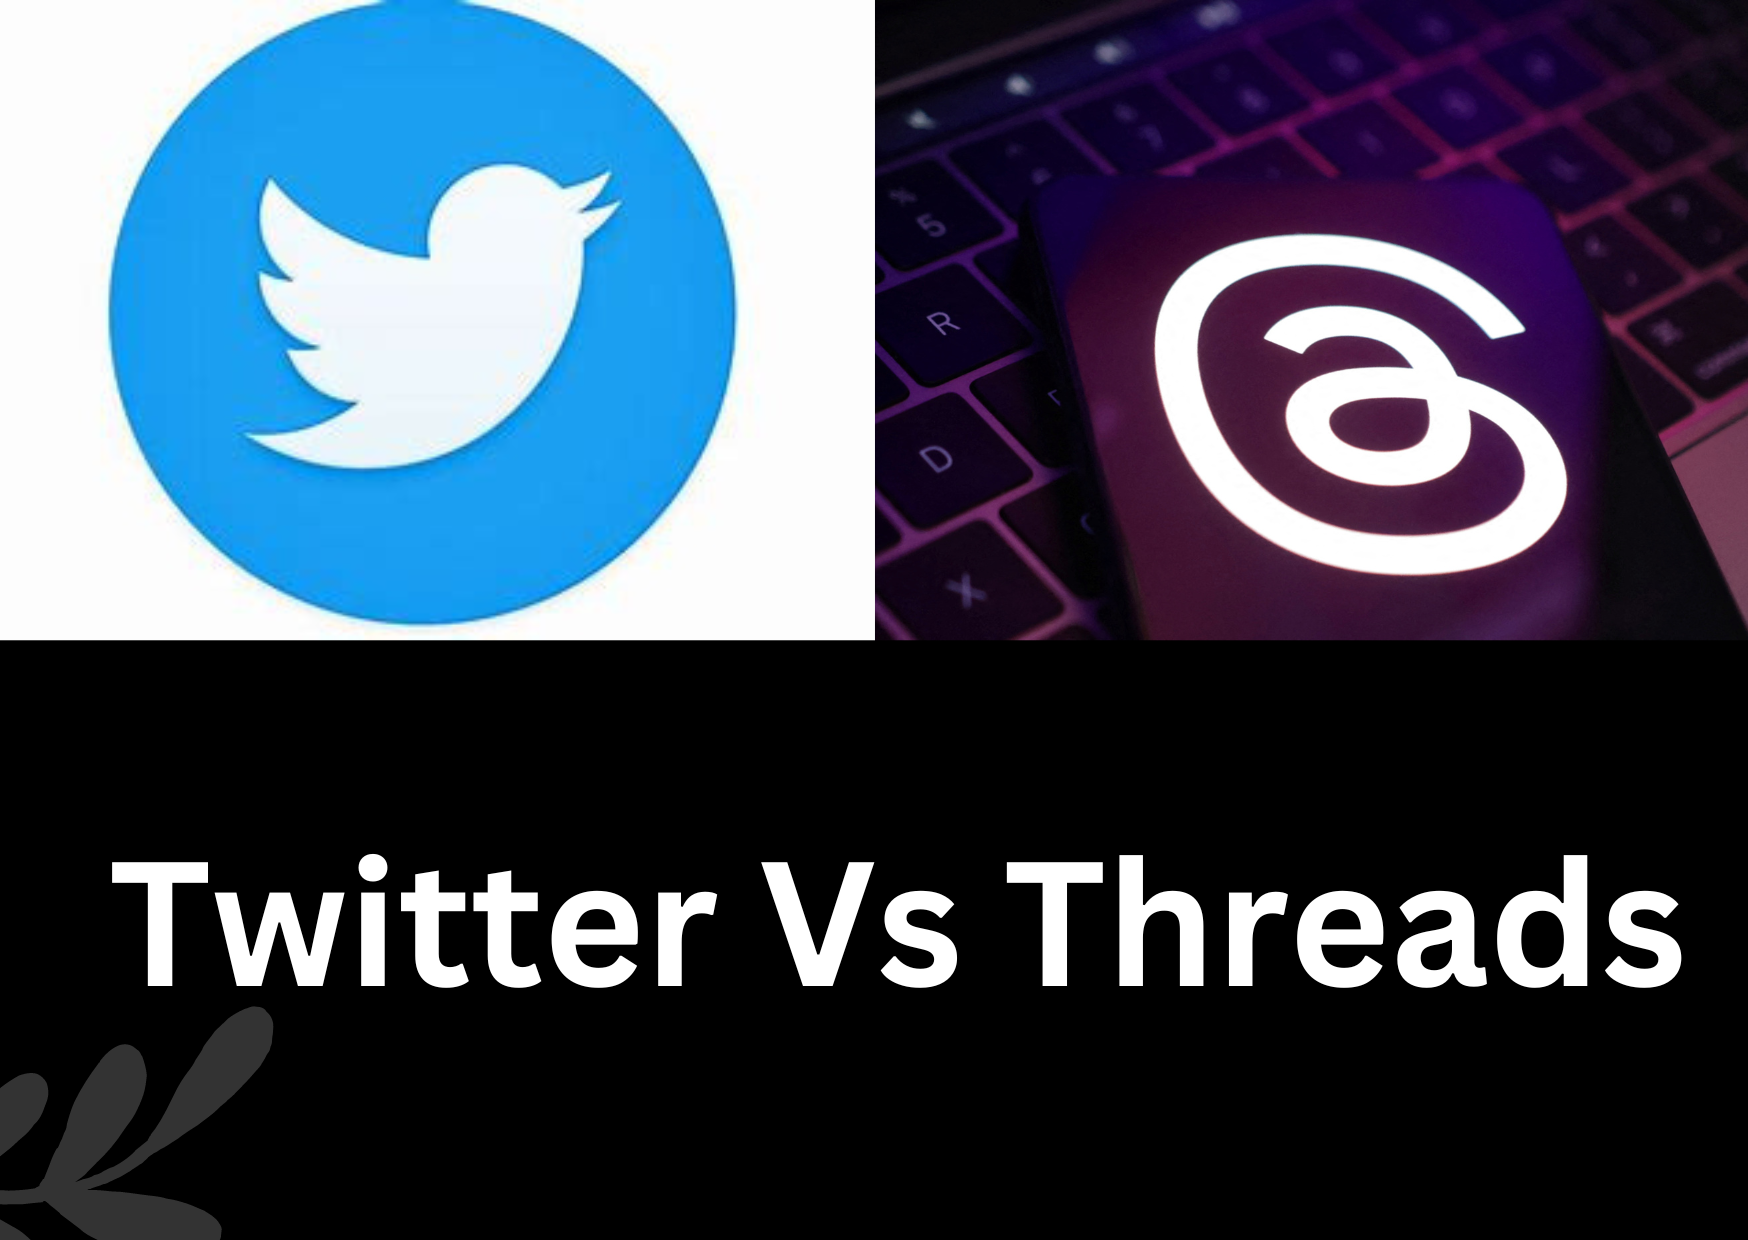 What is the major difference between Twitter and Threads?